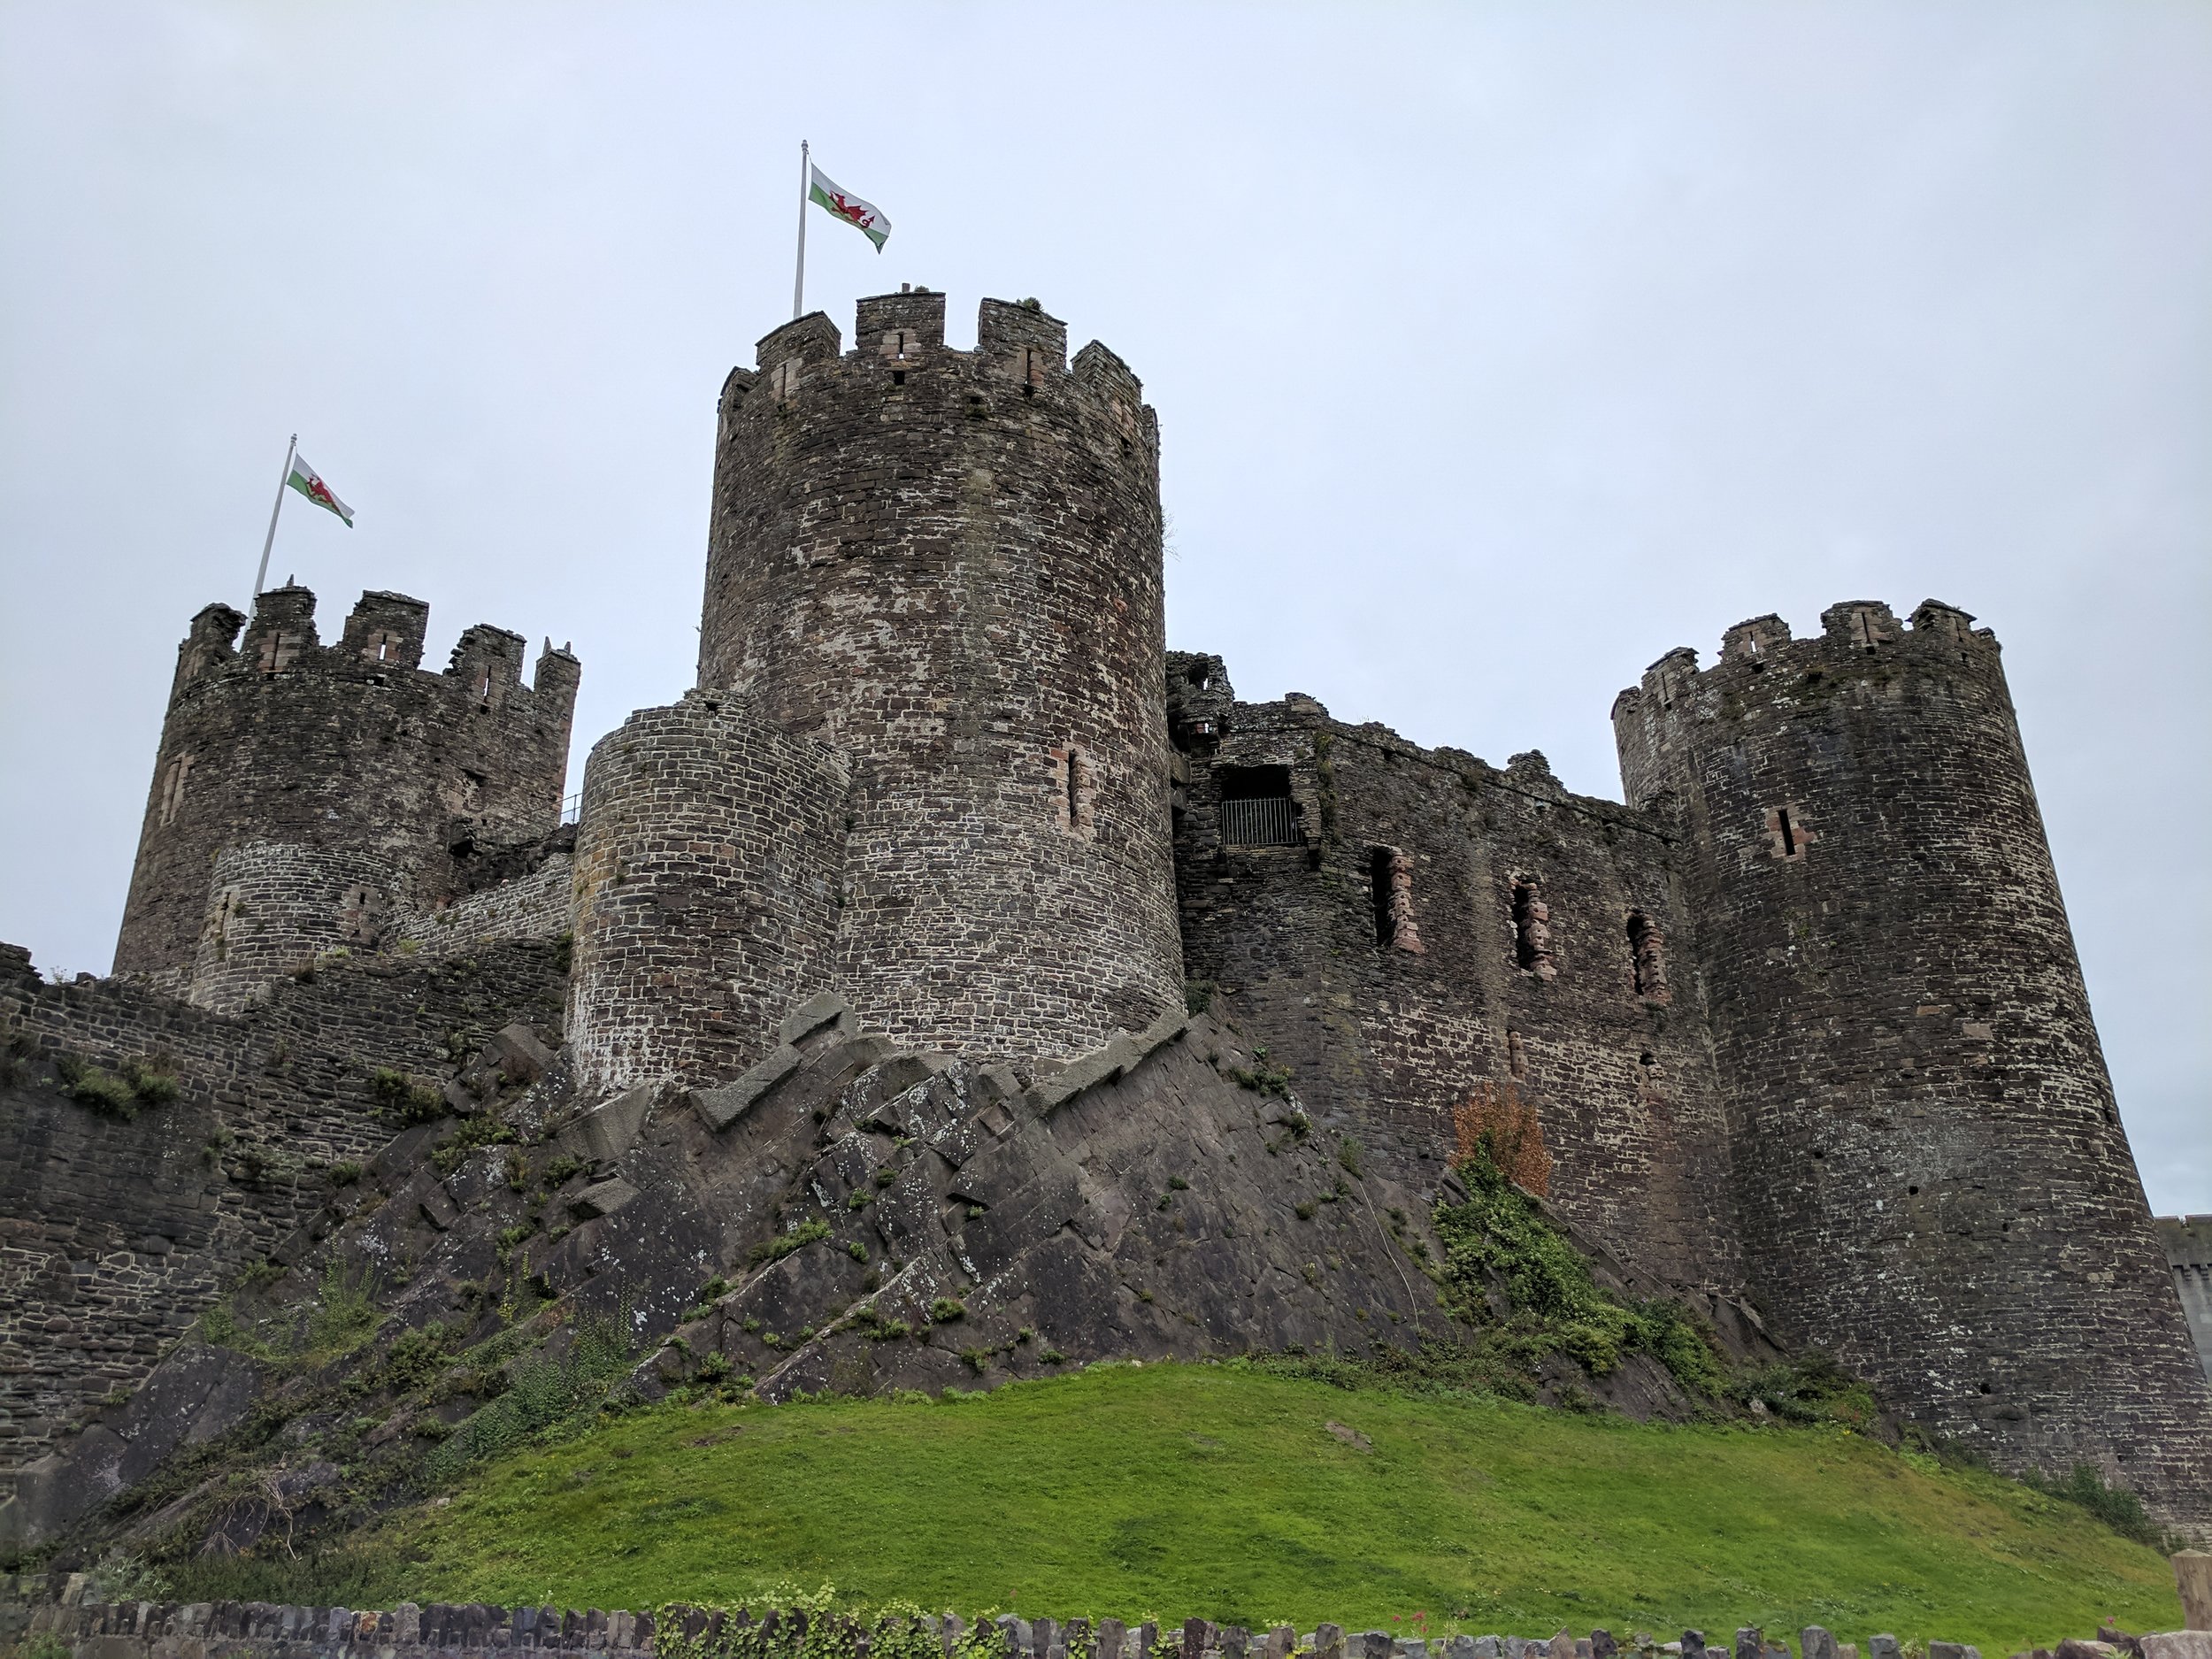  Conwy Castle in Conwy, Wales 